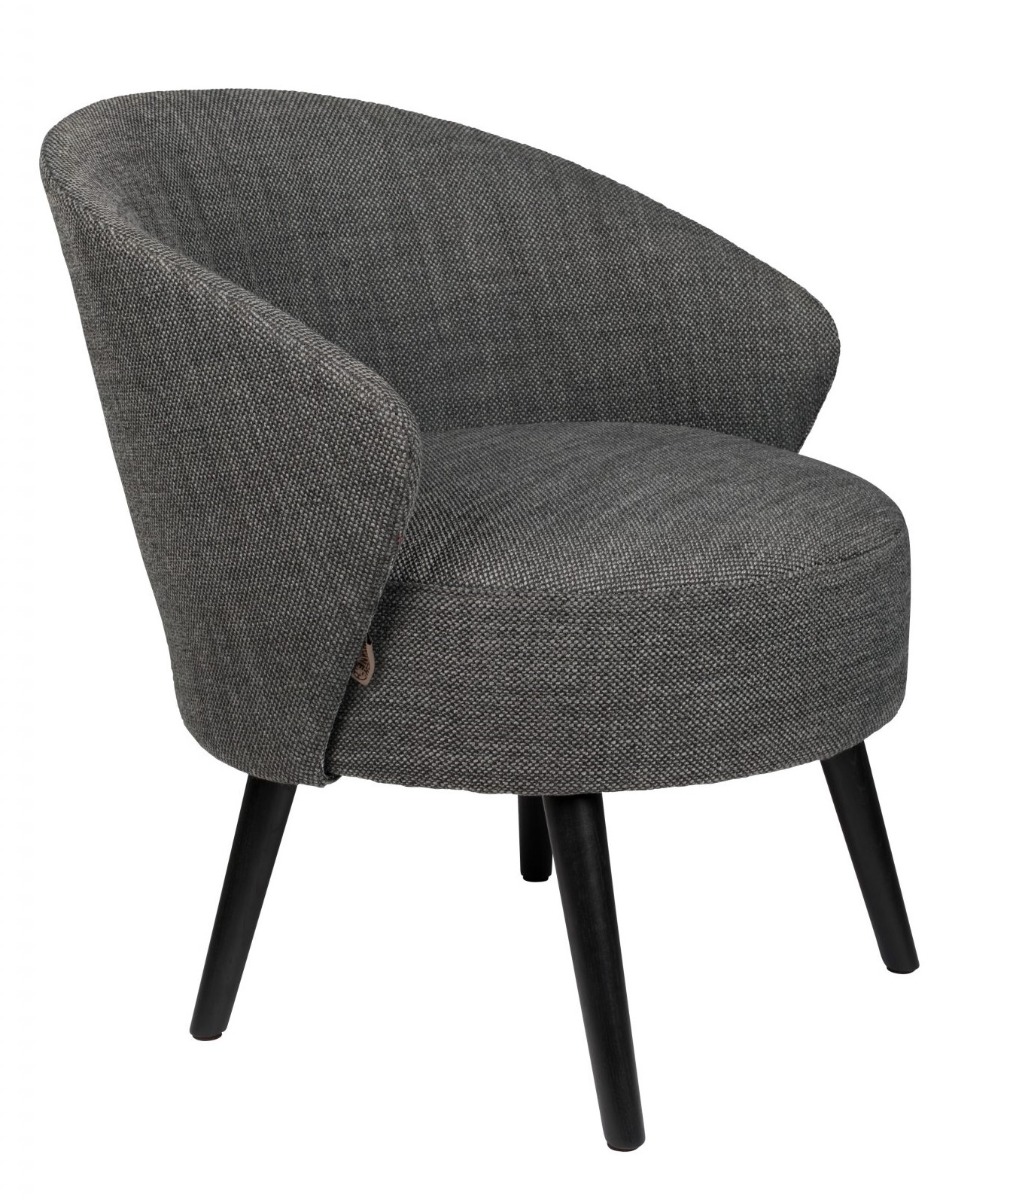 Waldo Lounge Chair in Anthracite